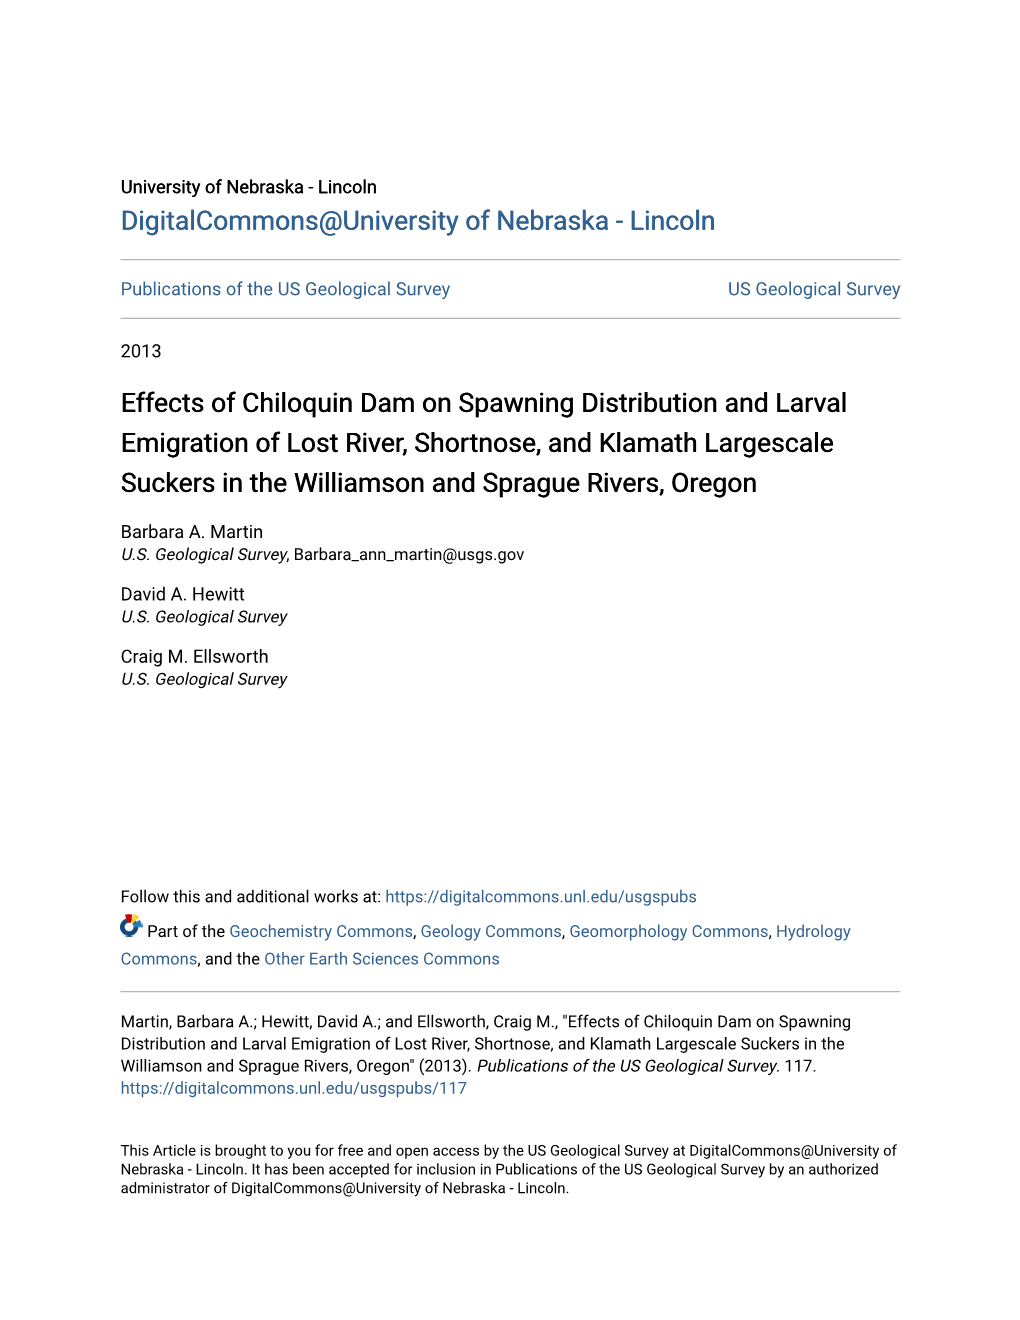 Effects of Chiloquin Dam on Spawning Distribution and Larval Emigration of Lost River, Shortnose, and Klamath Largescale Sucke